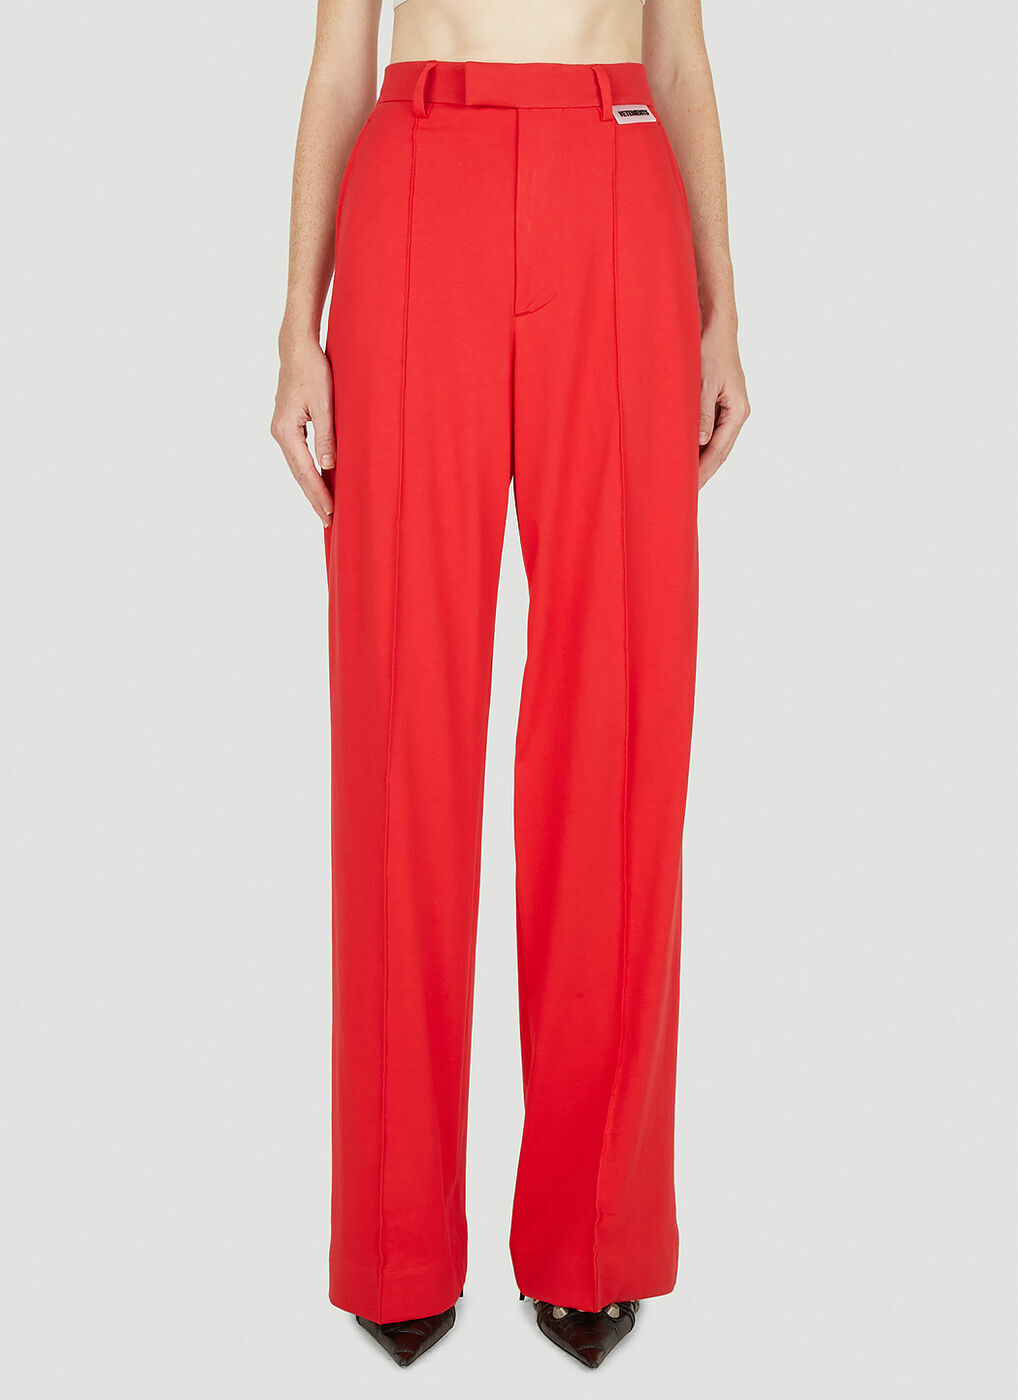 Tailored Pants in Red Vetements